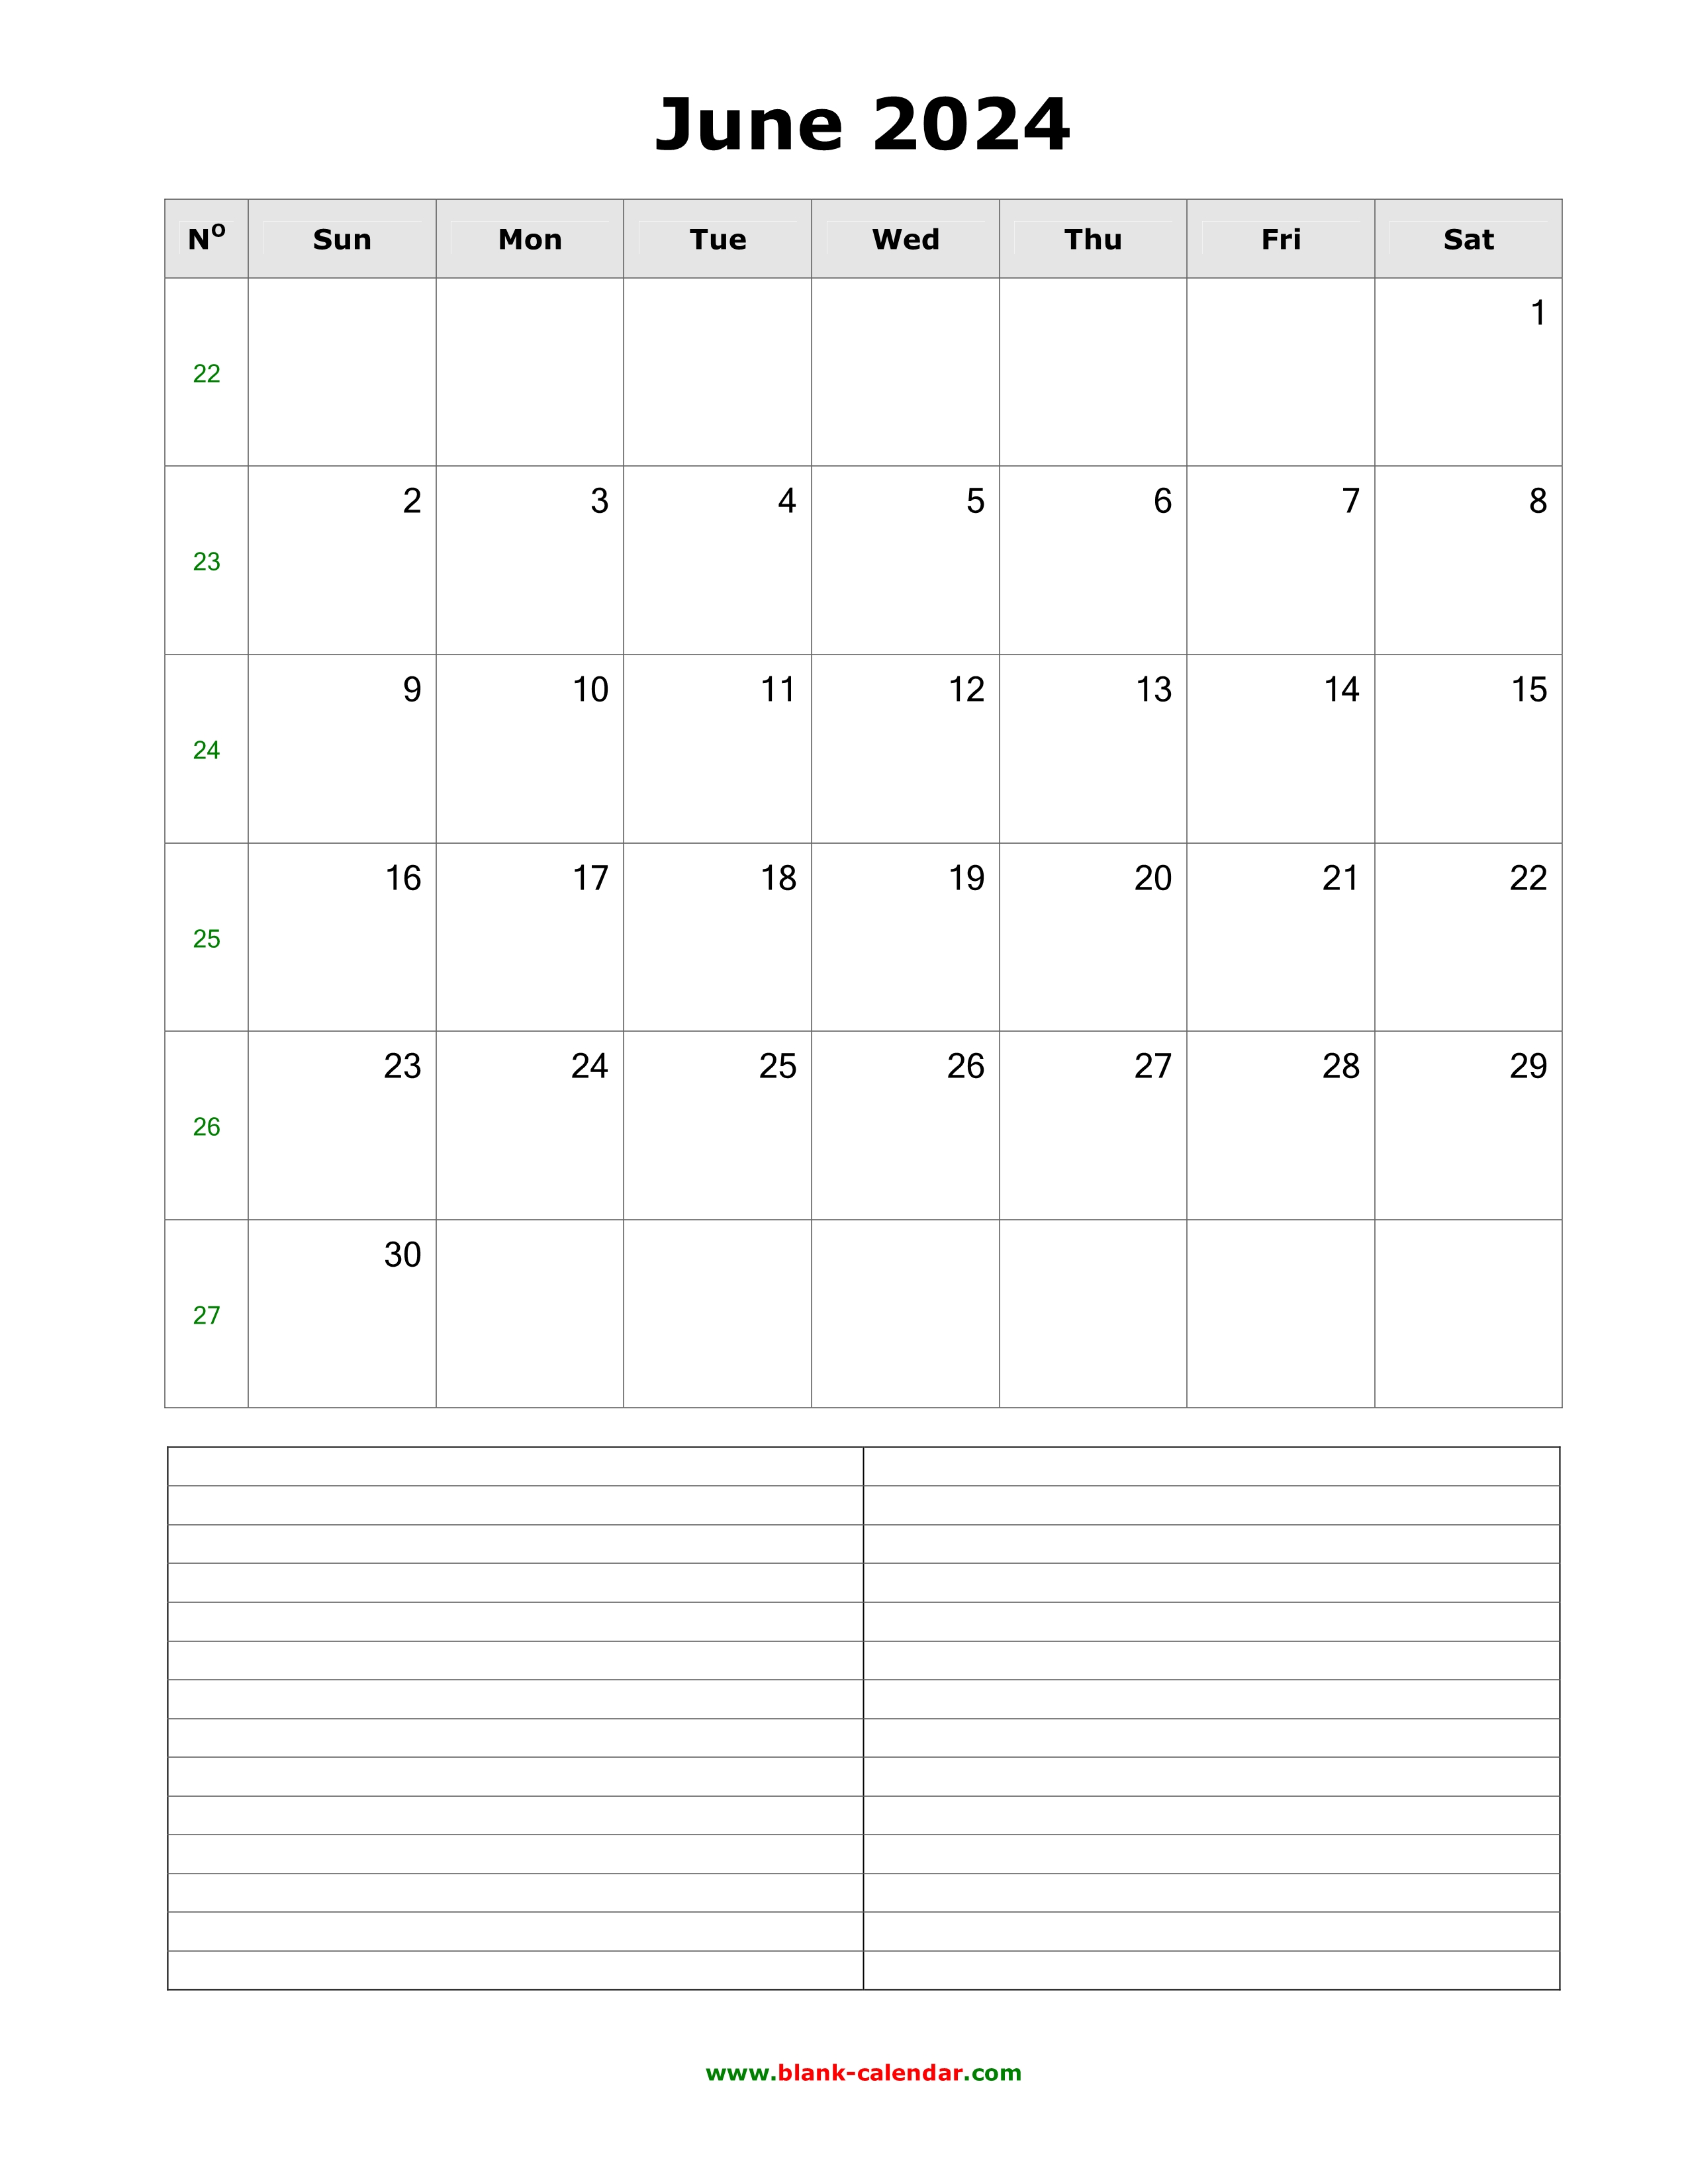 Download June 2024 Blank Calendar with Space for Notes (vertical)